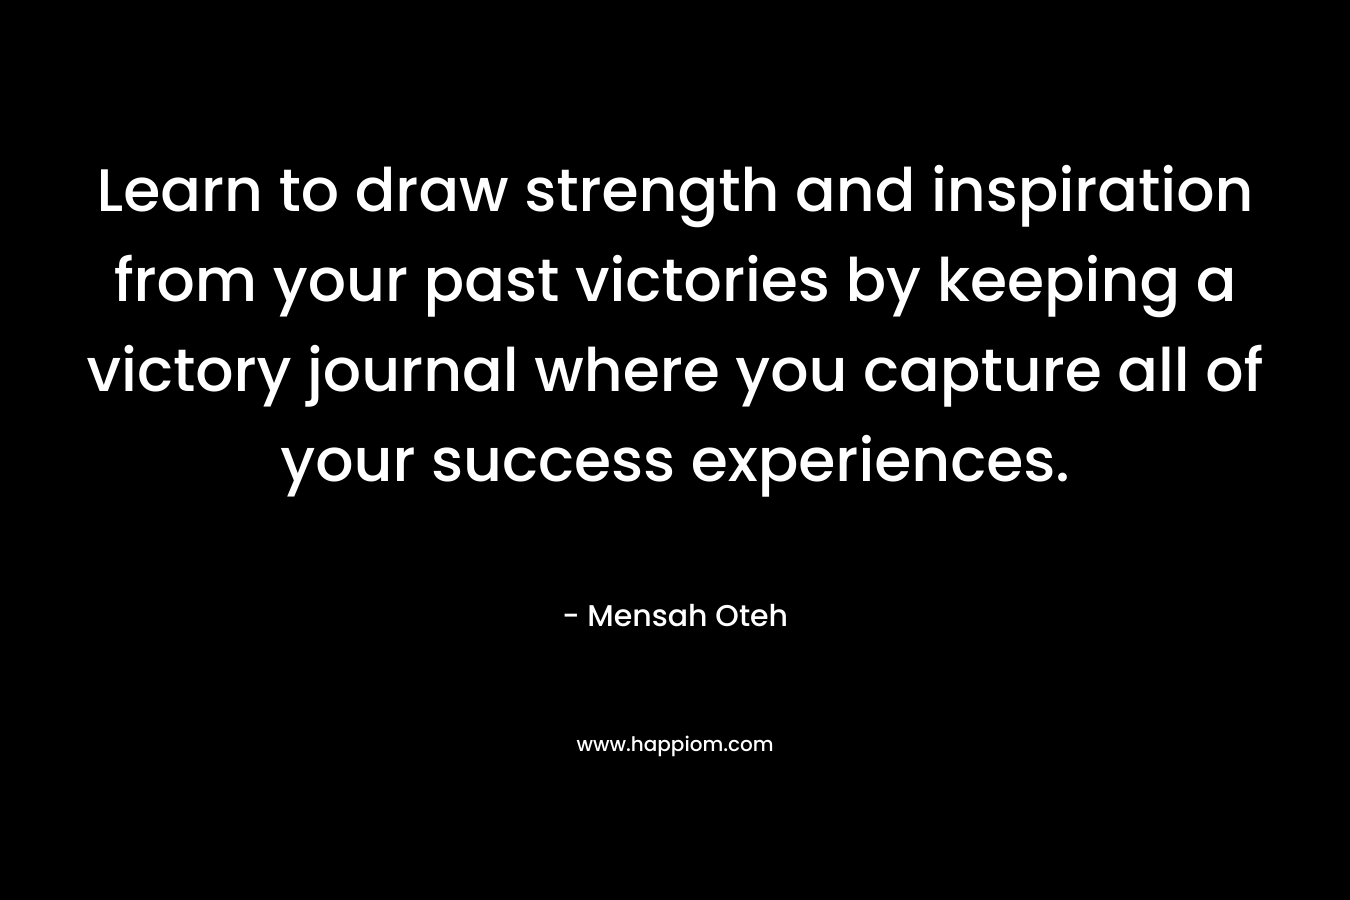 Learn to draw strength and inspiration from your past victories by keeping a victory journal where you capture all of your success experiences.